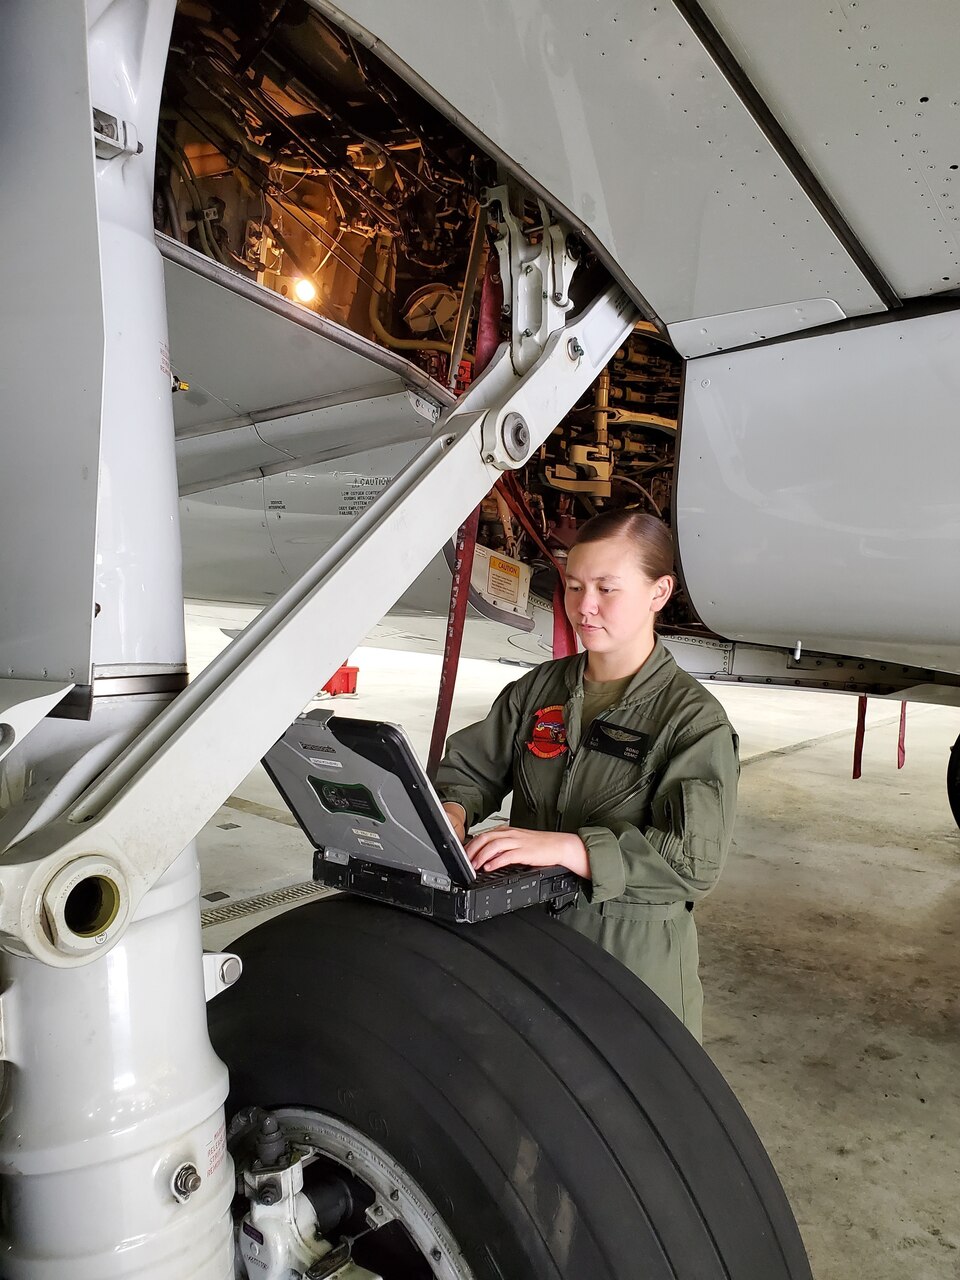 U.S. Marine Corps Staff Sgt. Song, a C-40A Clipper crew chief with Marine Transport Squadron 1, Marine Aircraft Group 41, Marine Forces Reserve, reviews training publications while conducting preventative maintenance on a C-40A Clipper at Naval Air Station Joint Reserve Base Fort Worth, Texas.